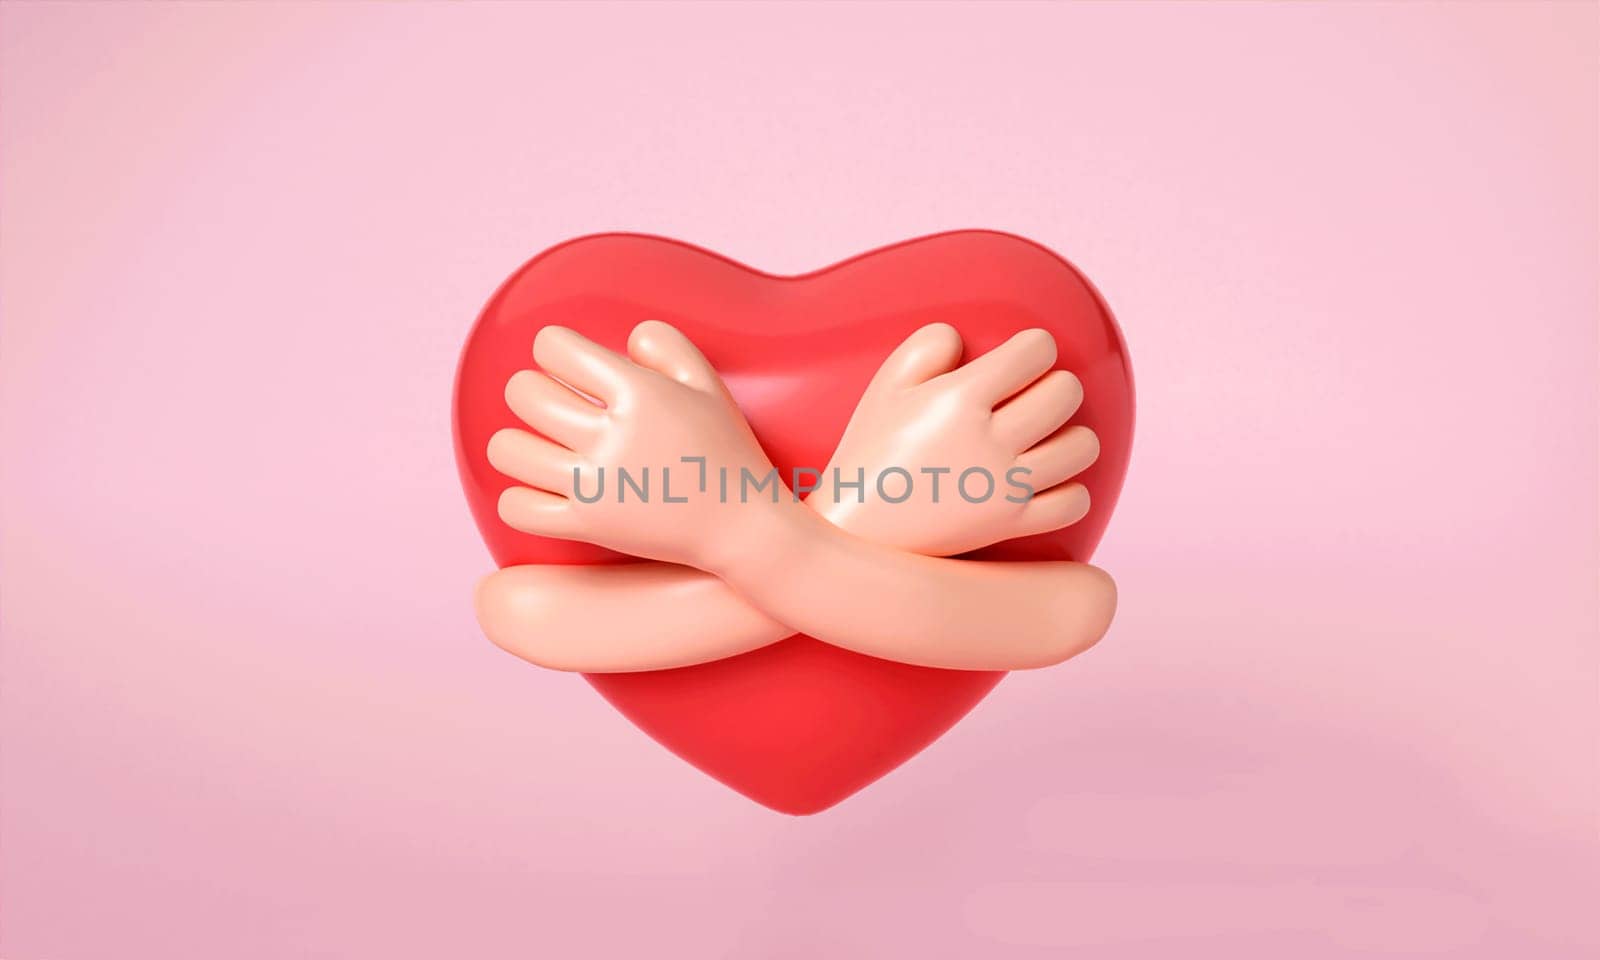 3D hands hugging a red heart with love. Hand embracing red heart on pink background. love yourself. Used for posters, postcards, World Heart Day. 3D render illustration by meepiangraphic